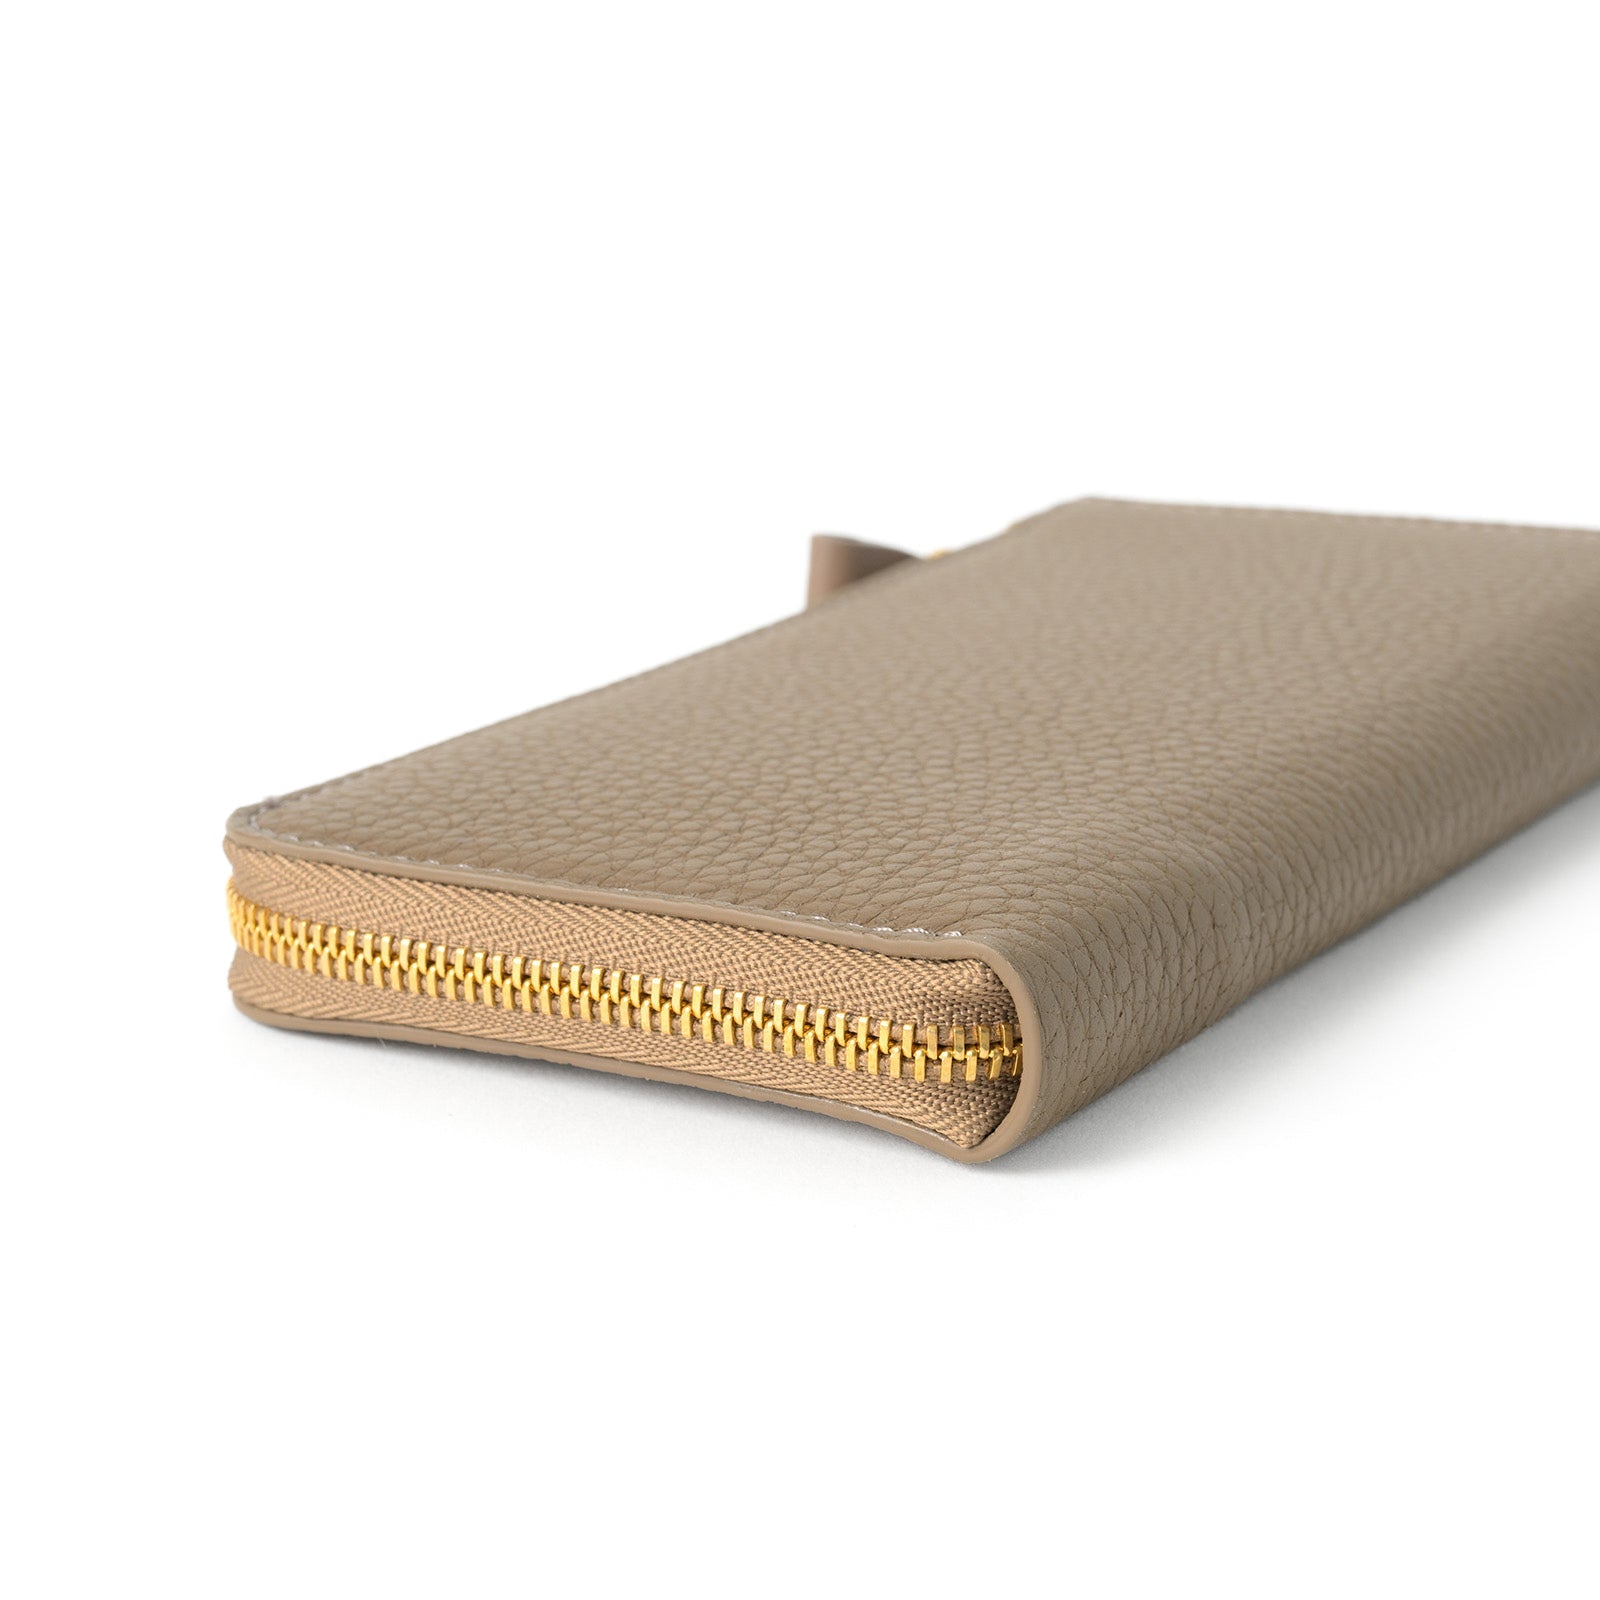 Long wallet with L-Shaped fastener / Taurillon Clemence